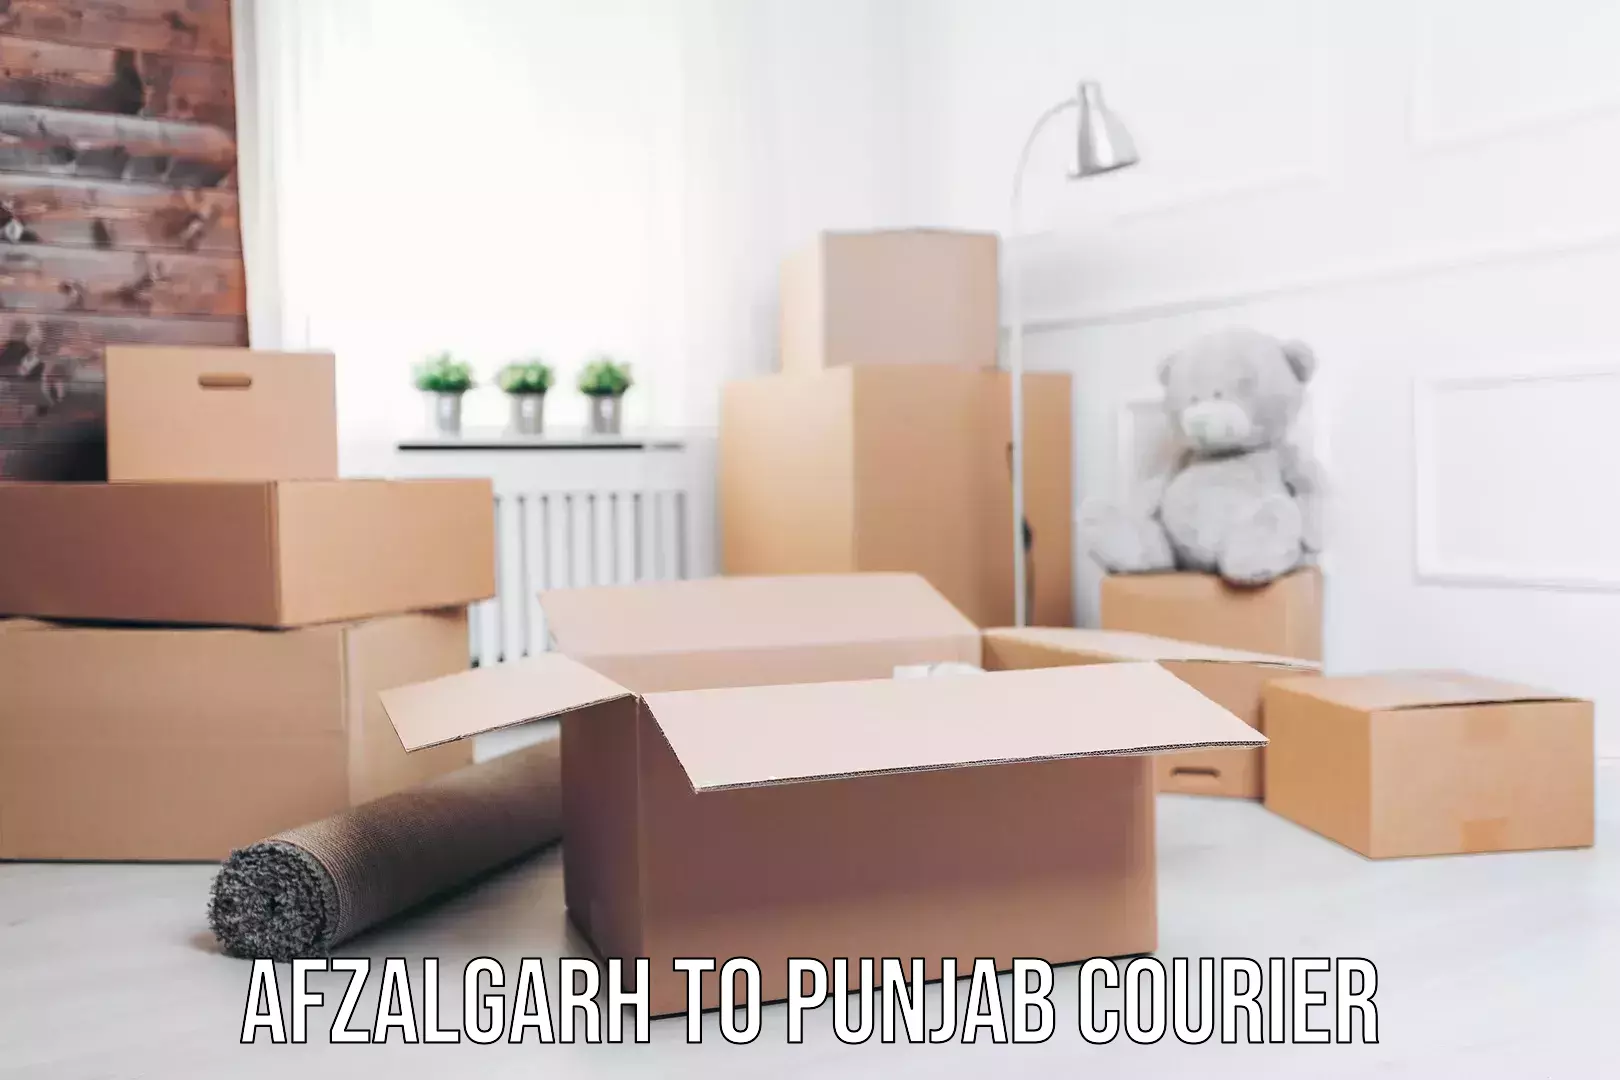 Courier tracking online Afzalgarh to Punjab